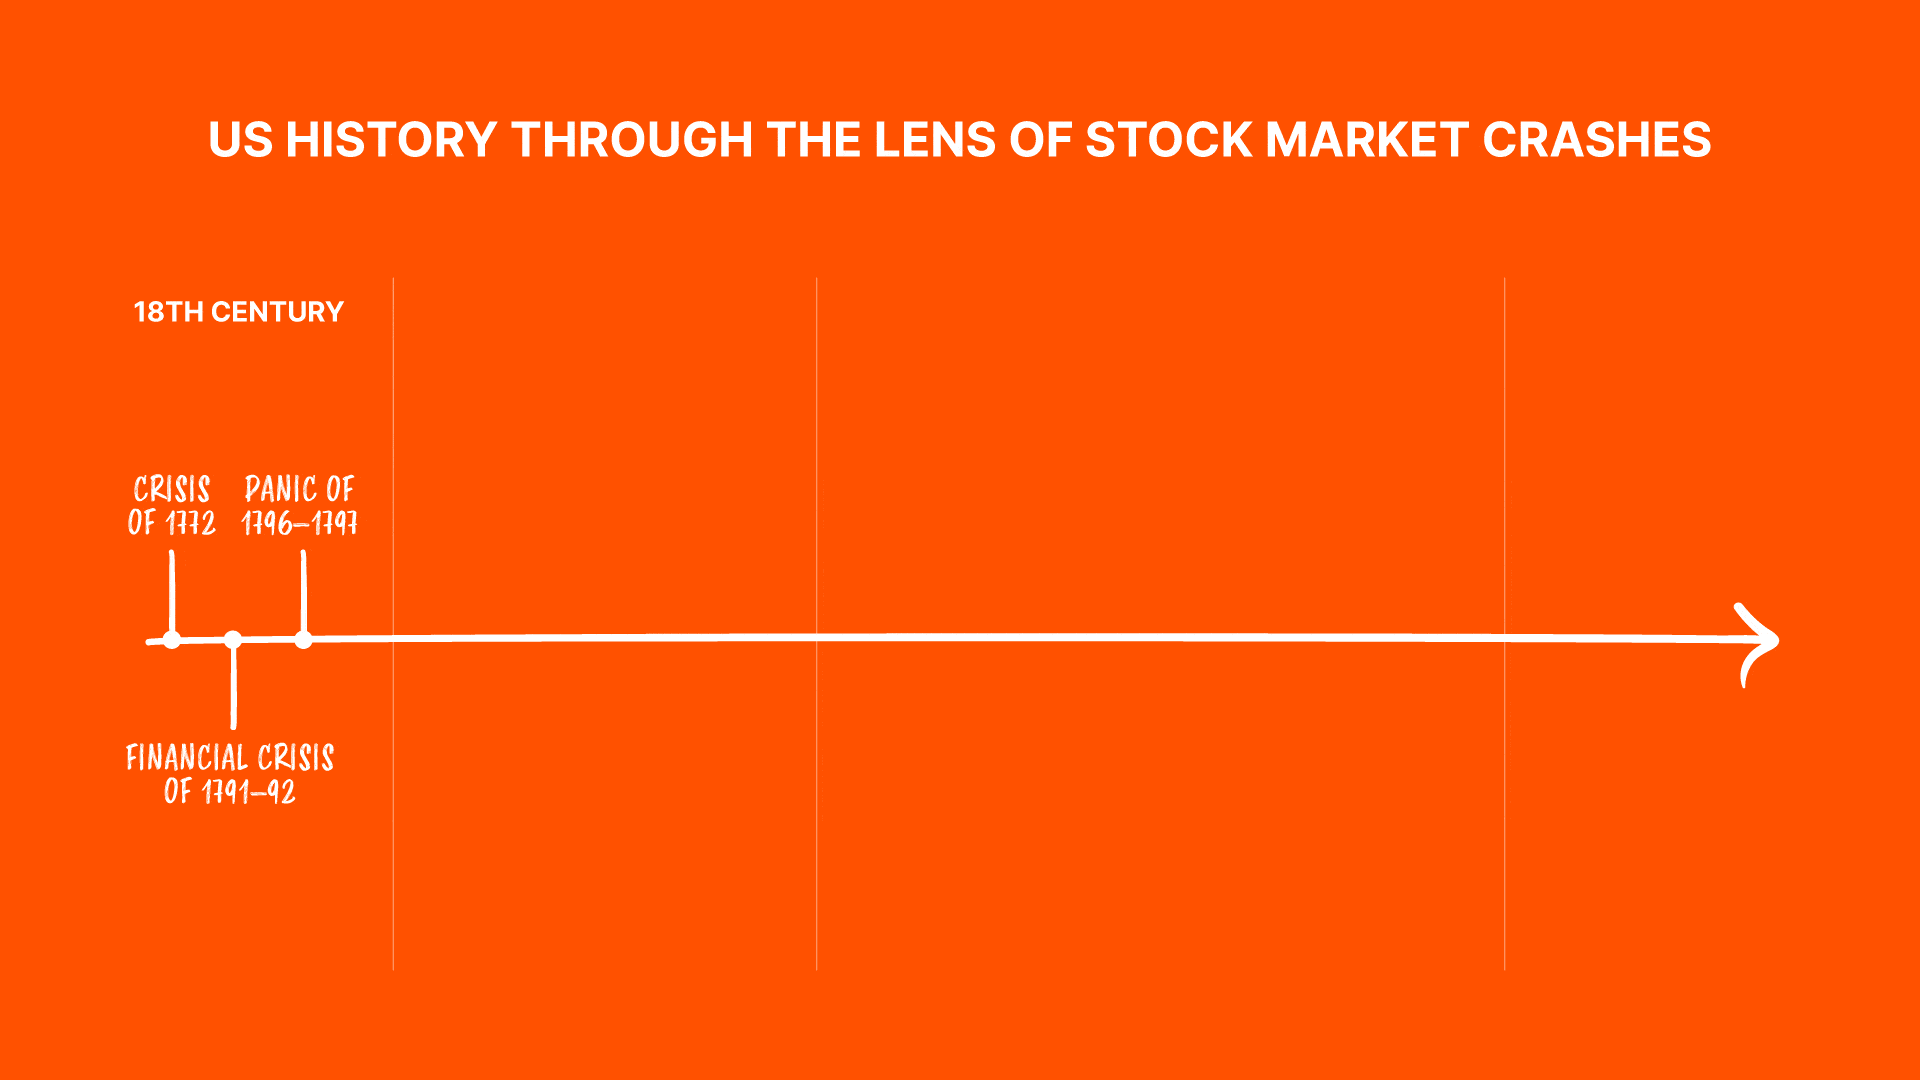 Timeline showing US history through the lens of stock market crashes 